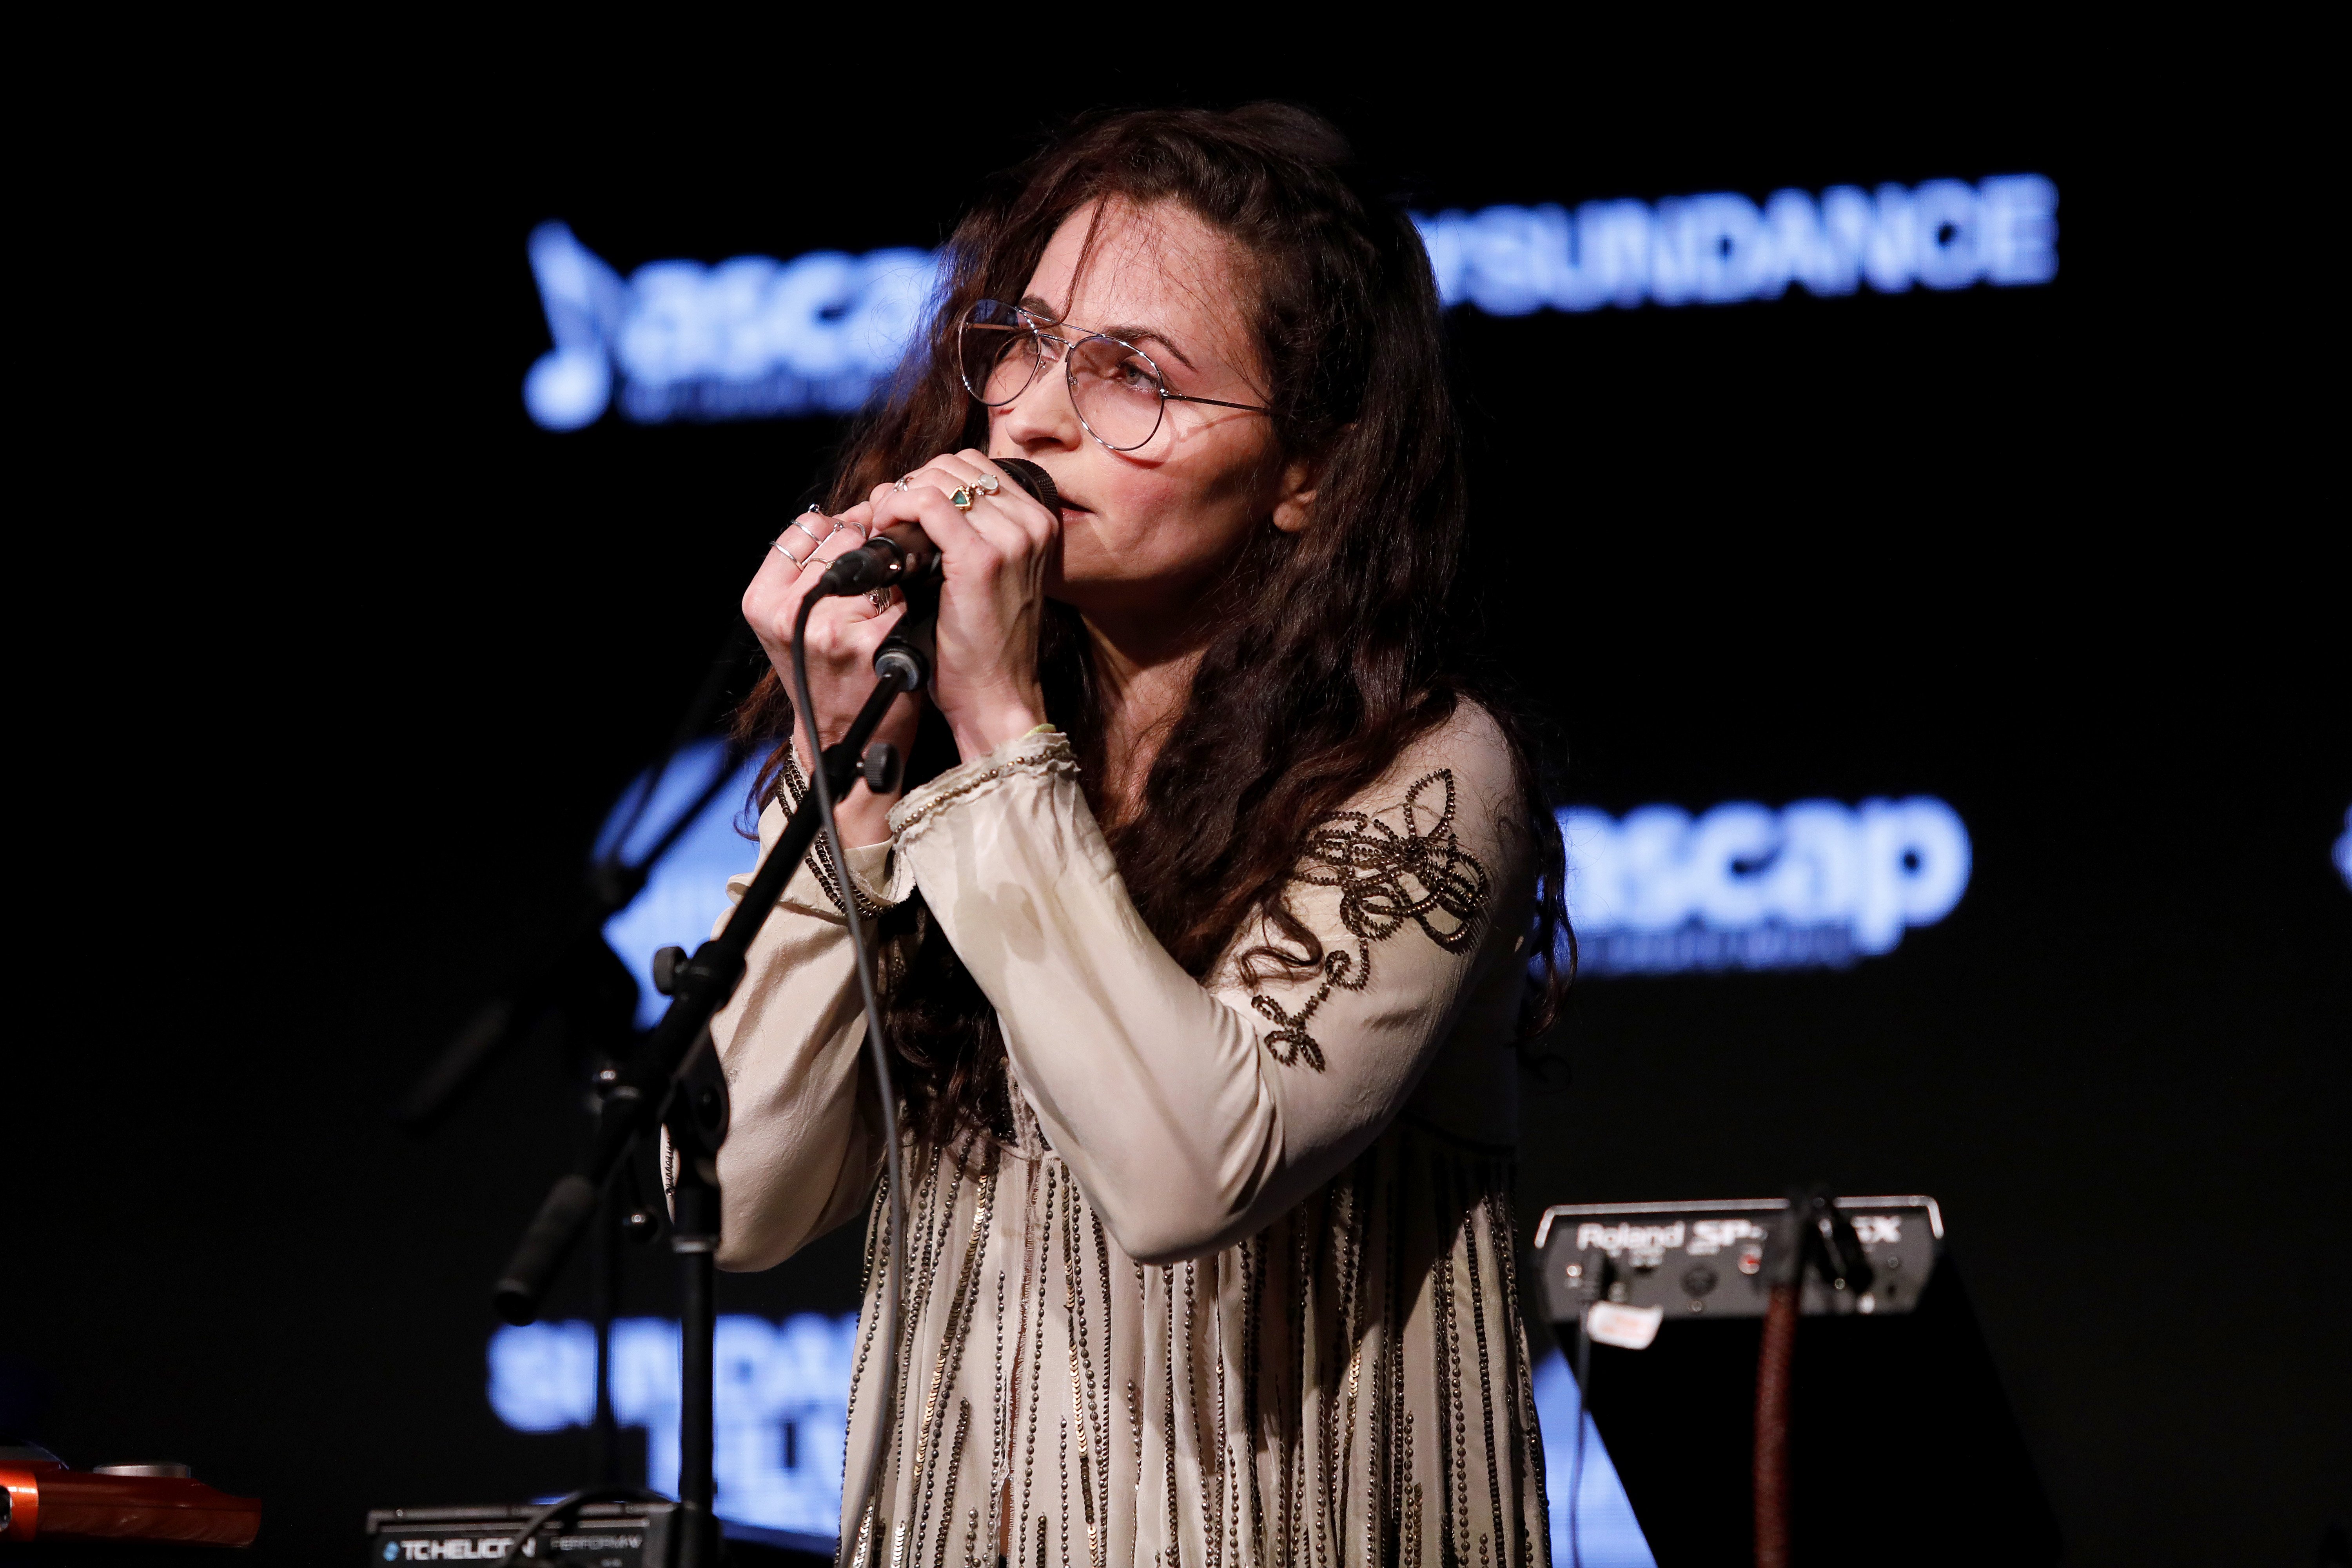 Rain Phoenix photographed as she performs onstage during the 2020 Sundance Film Festival in Park City | Source: Getty Images